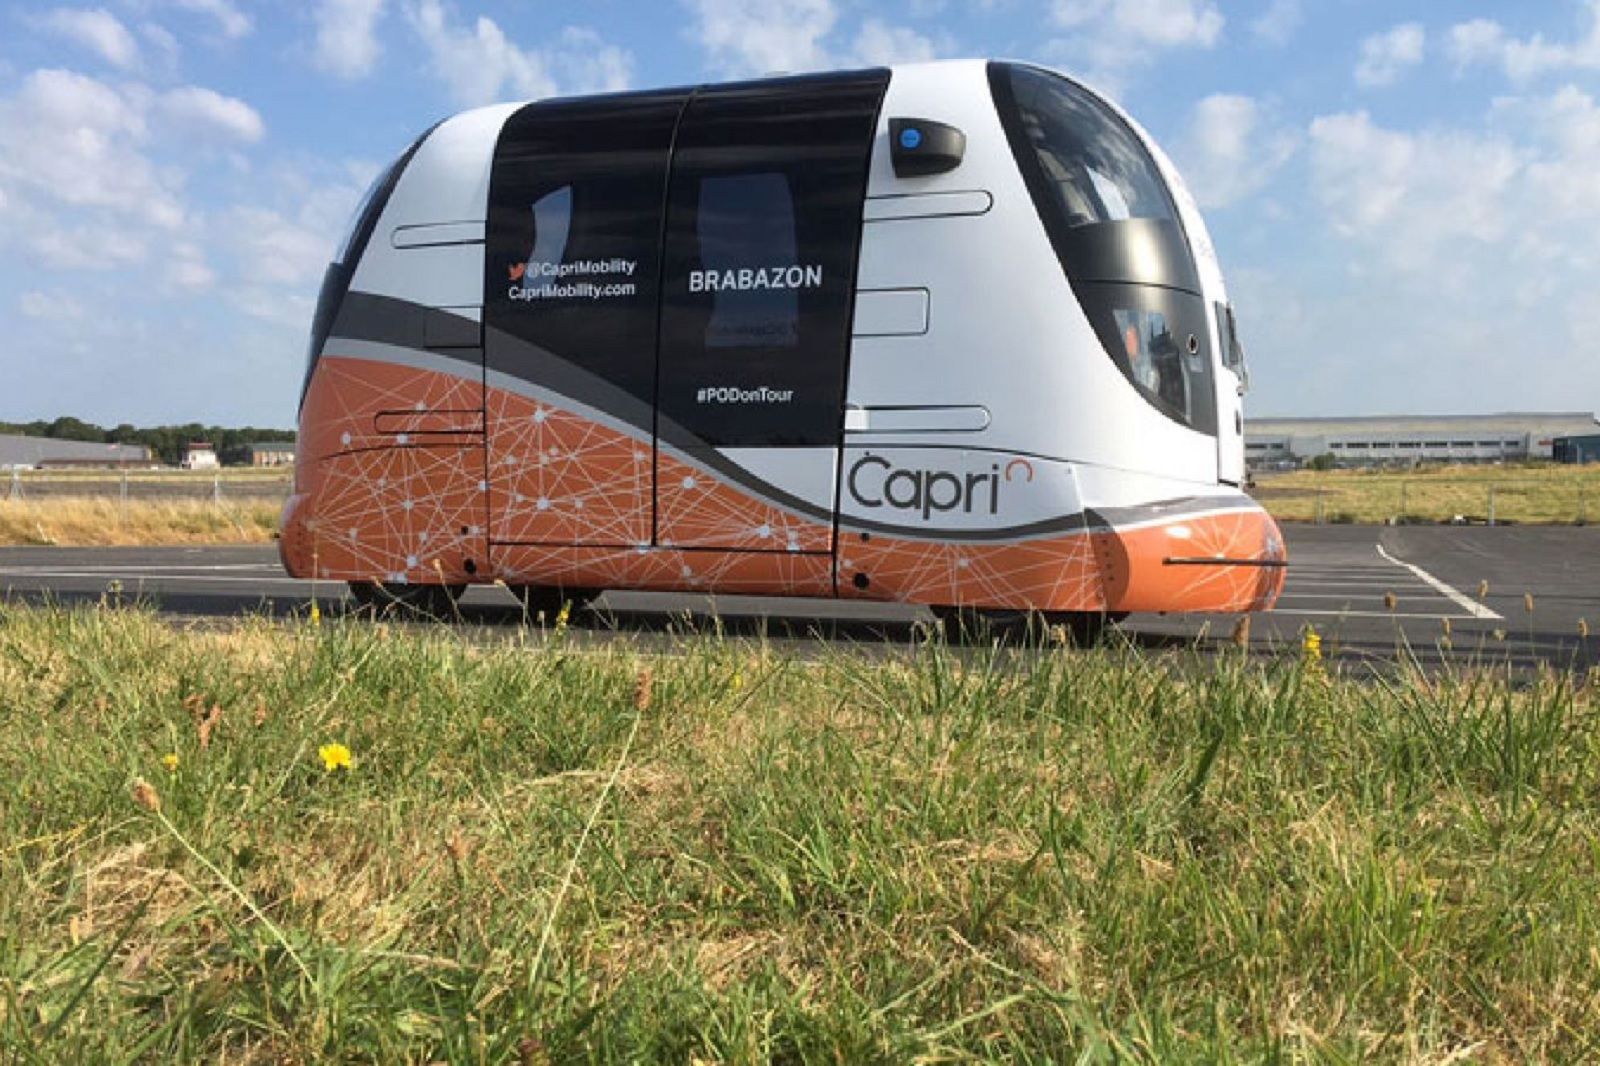 Driverless autonomous pods are now being tested in the UK image 1